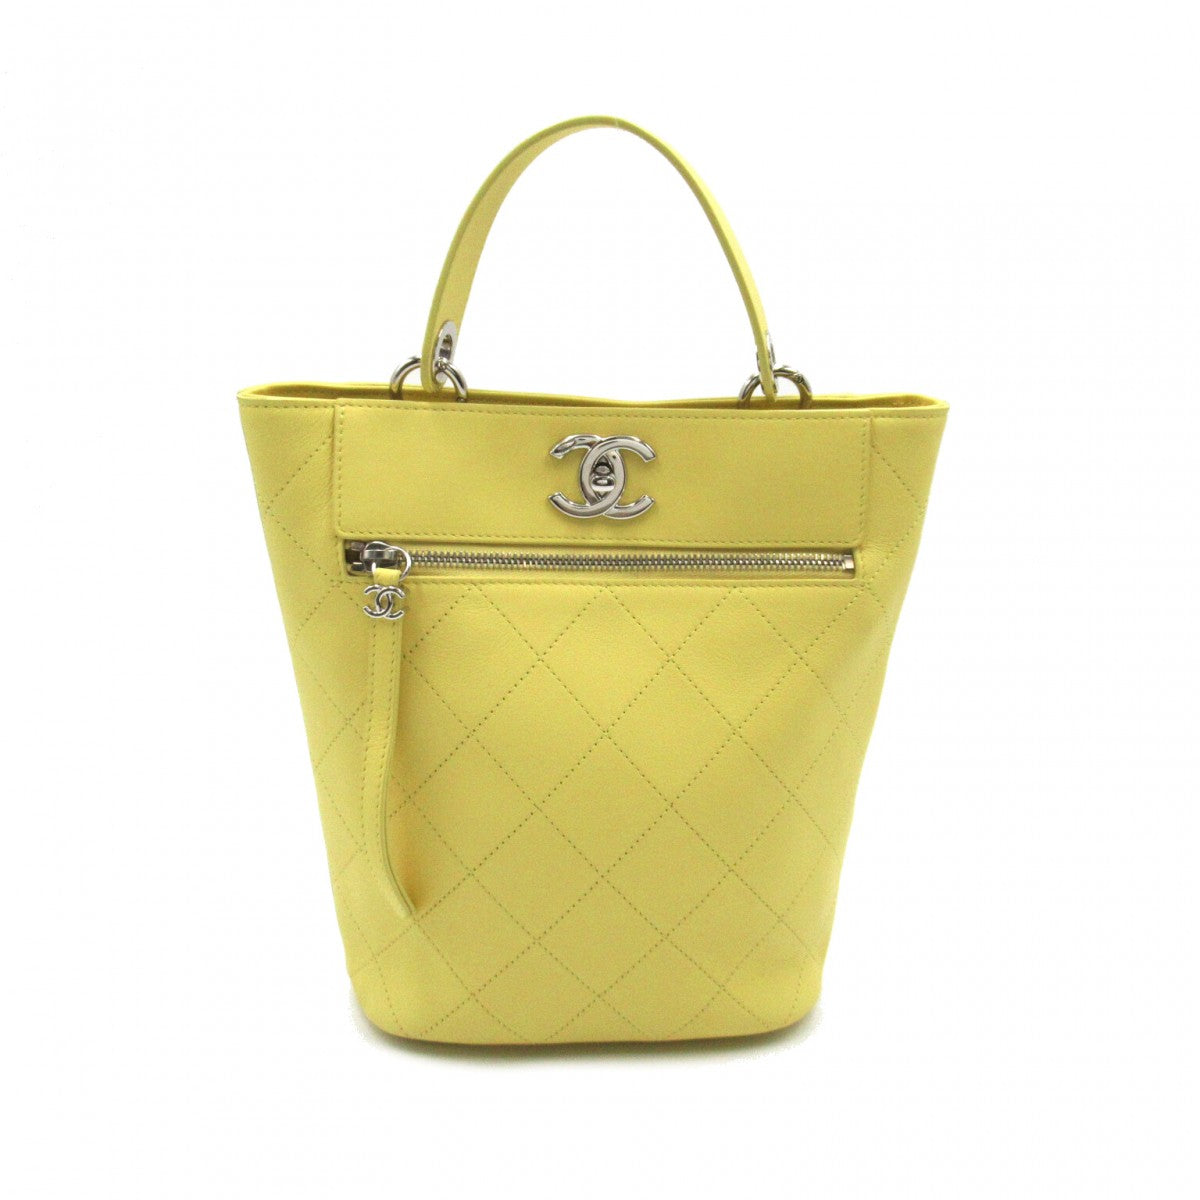 CC Quilted Leather Bucket Handbag